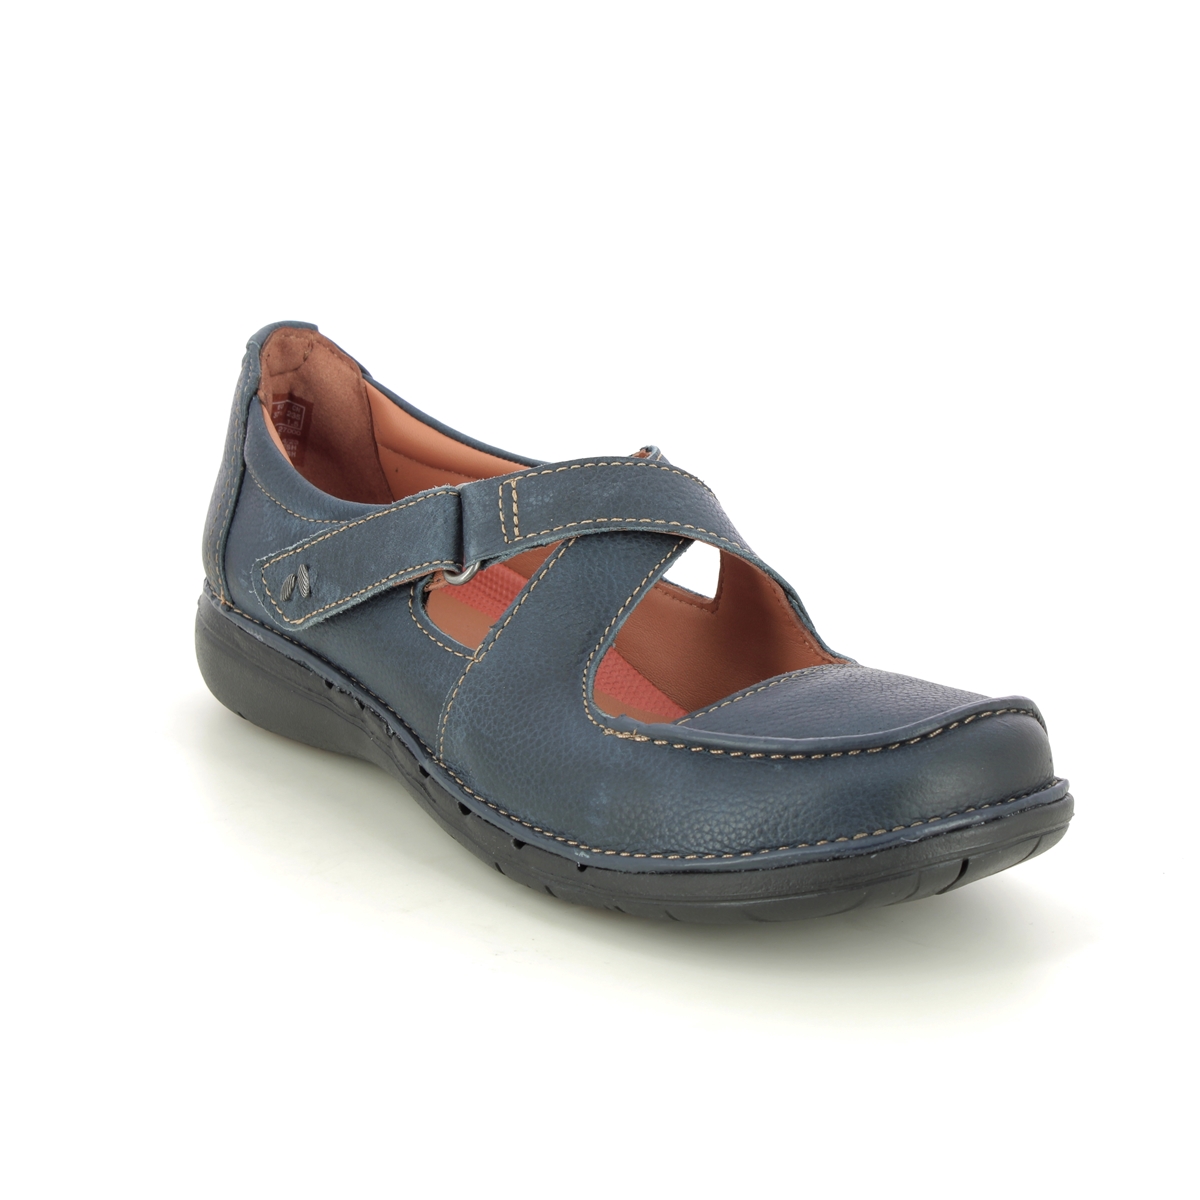 Clarks Un Loop Strap Navy Leather Womens Mary Jane Shoes 749724D In Size 5 In Plain Navy Leather